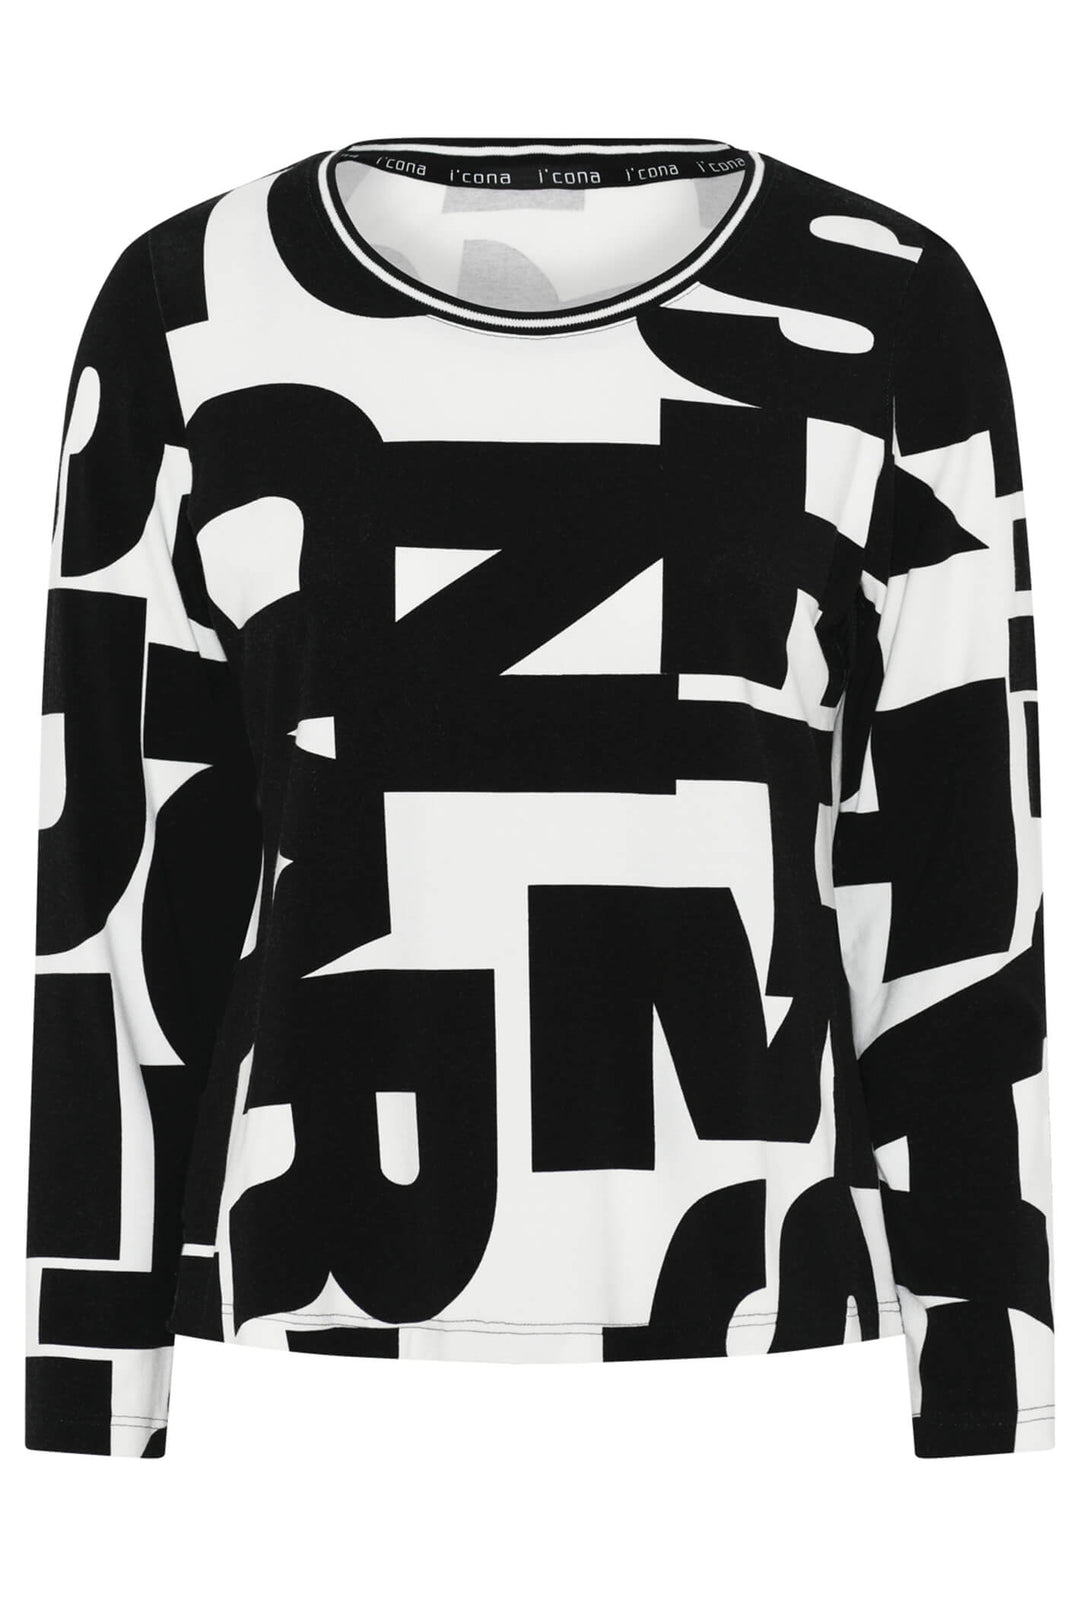 Icona 64142 Black White Letter Print Long Sleeve Top - Experience Boutique